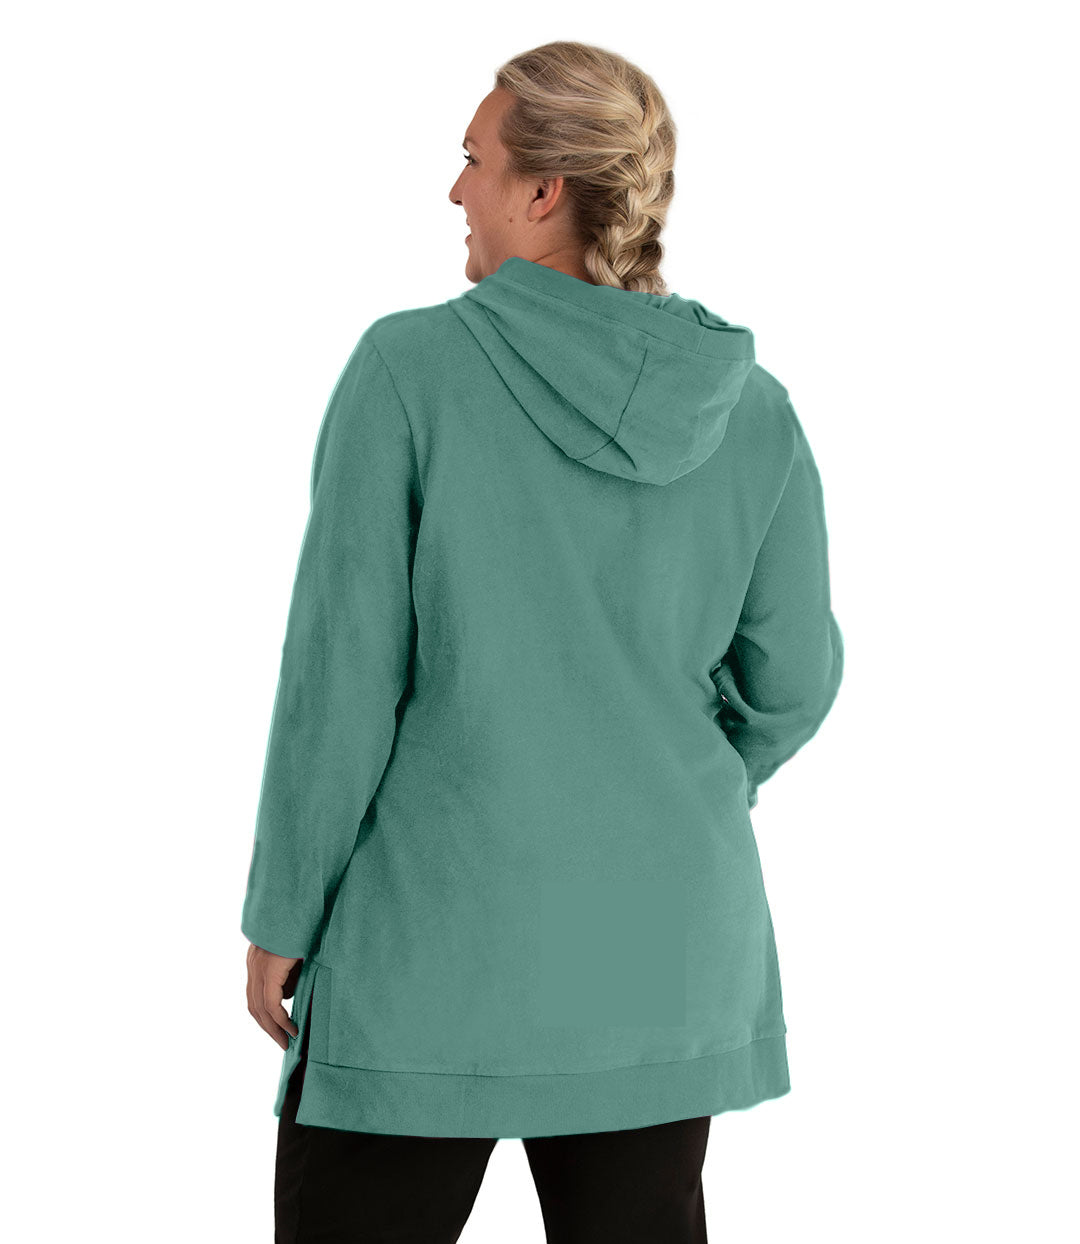 Plus size woman, facing back looking left, wearing JunoActive plus size Legacy Cotton Casual Pullover V-Neck Hoodie in the color Lichen Green. She is wearing JunoActive Plus Size Leggings in the color Black.